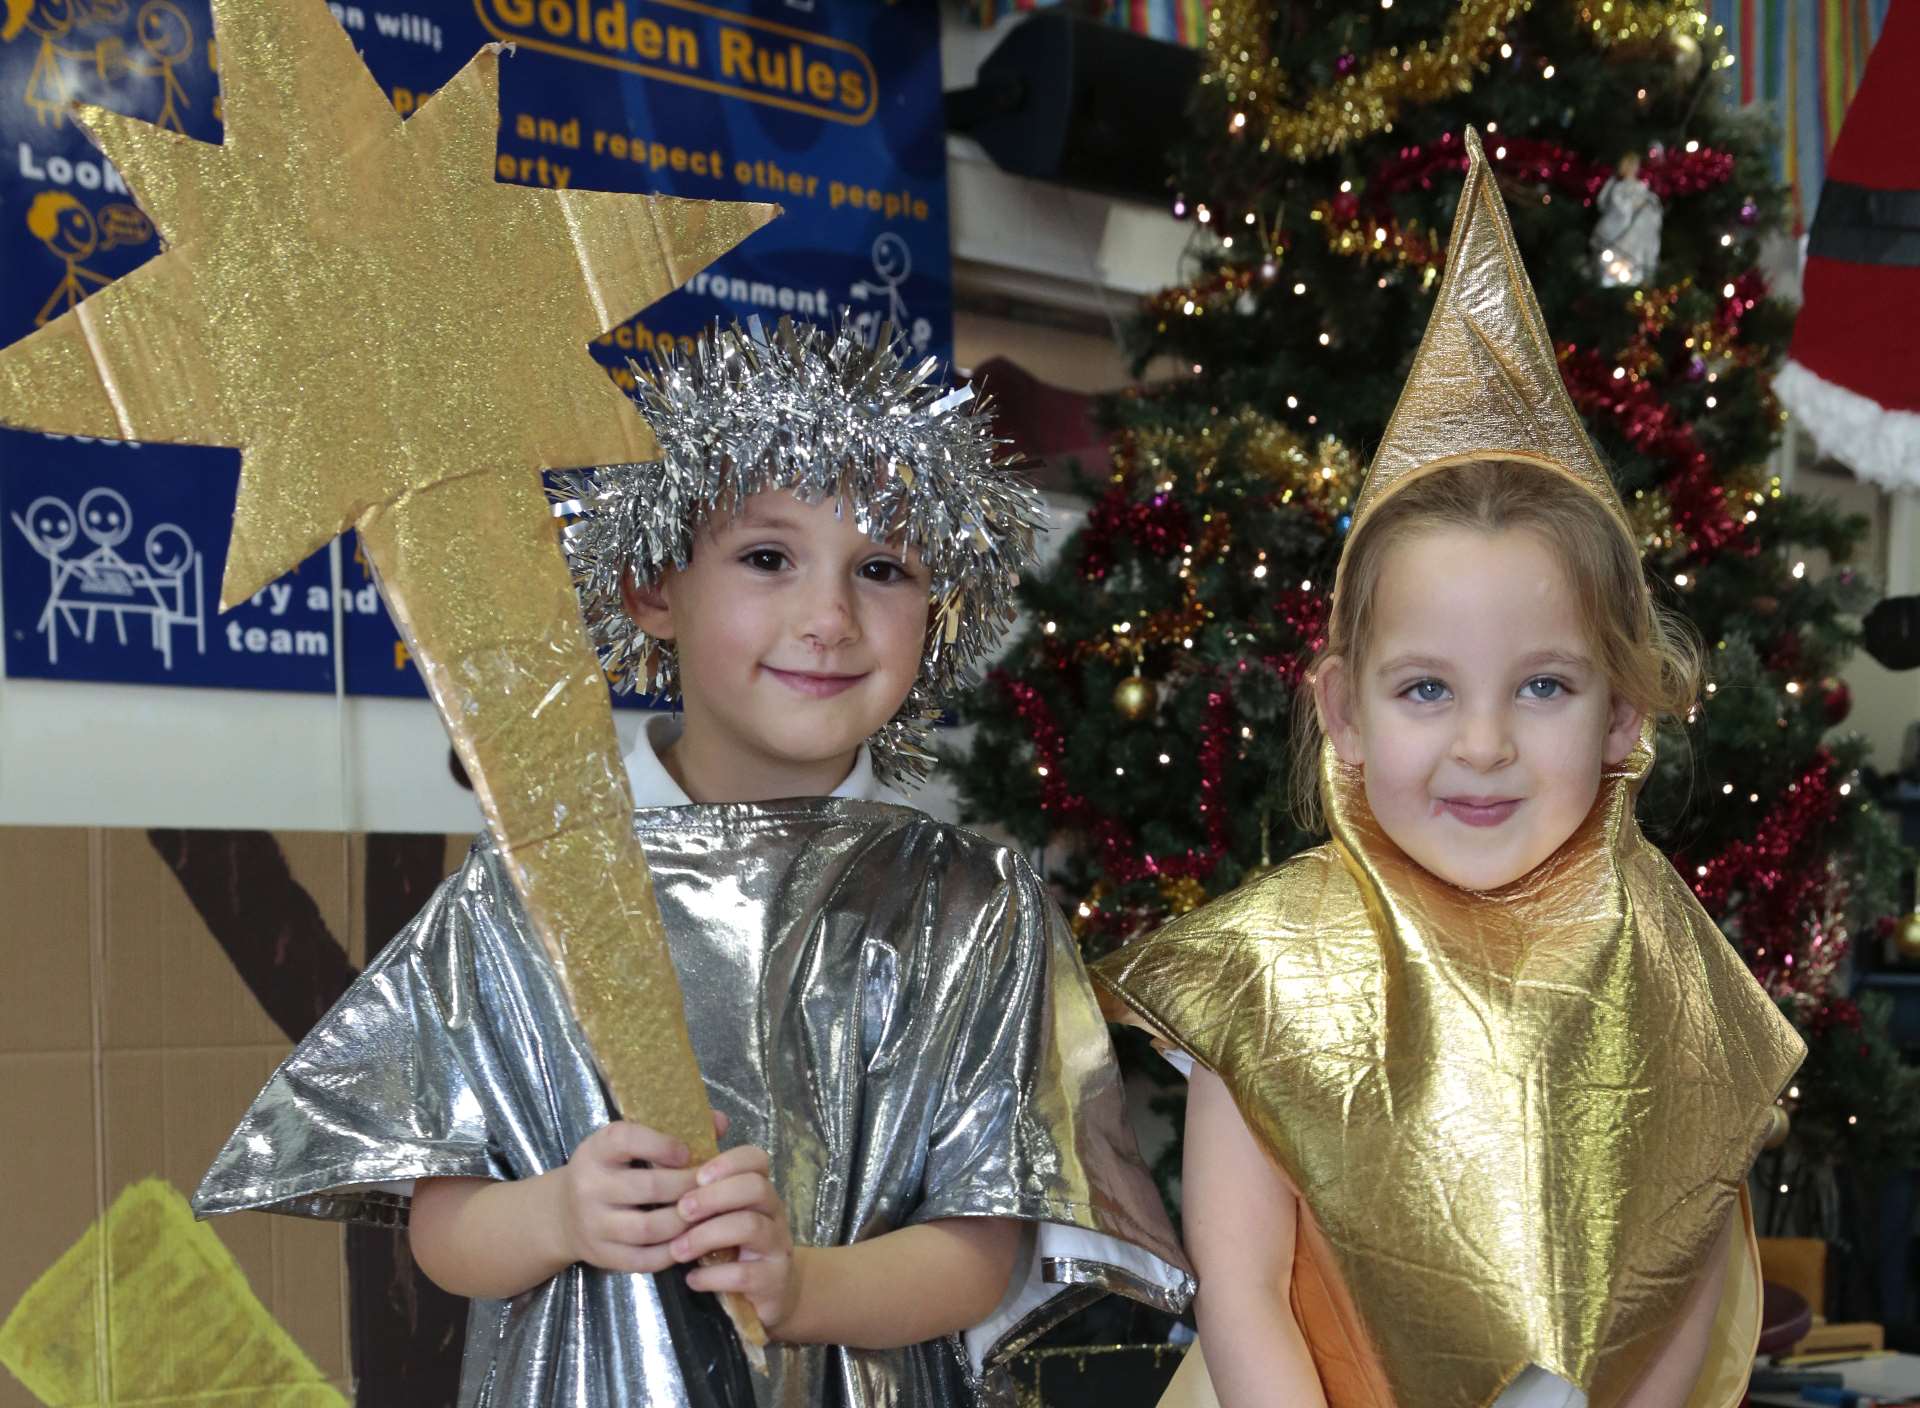 Regis Manor Primary School pupils looking shiny and bright for their festive play